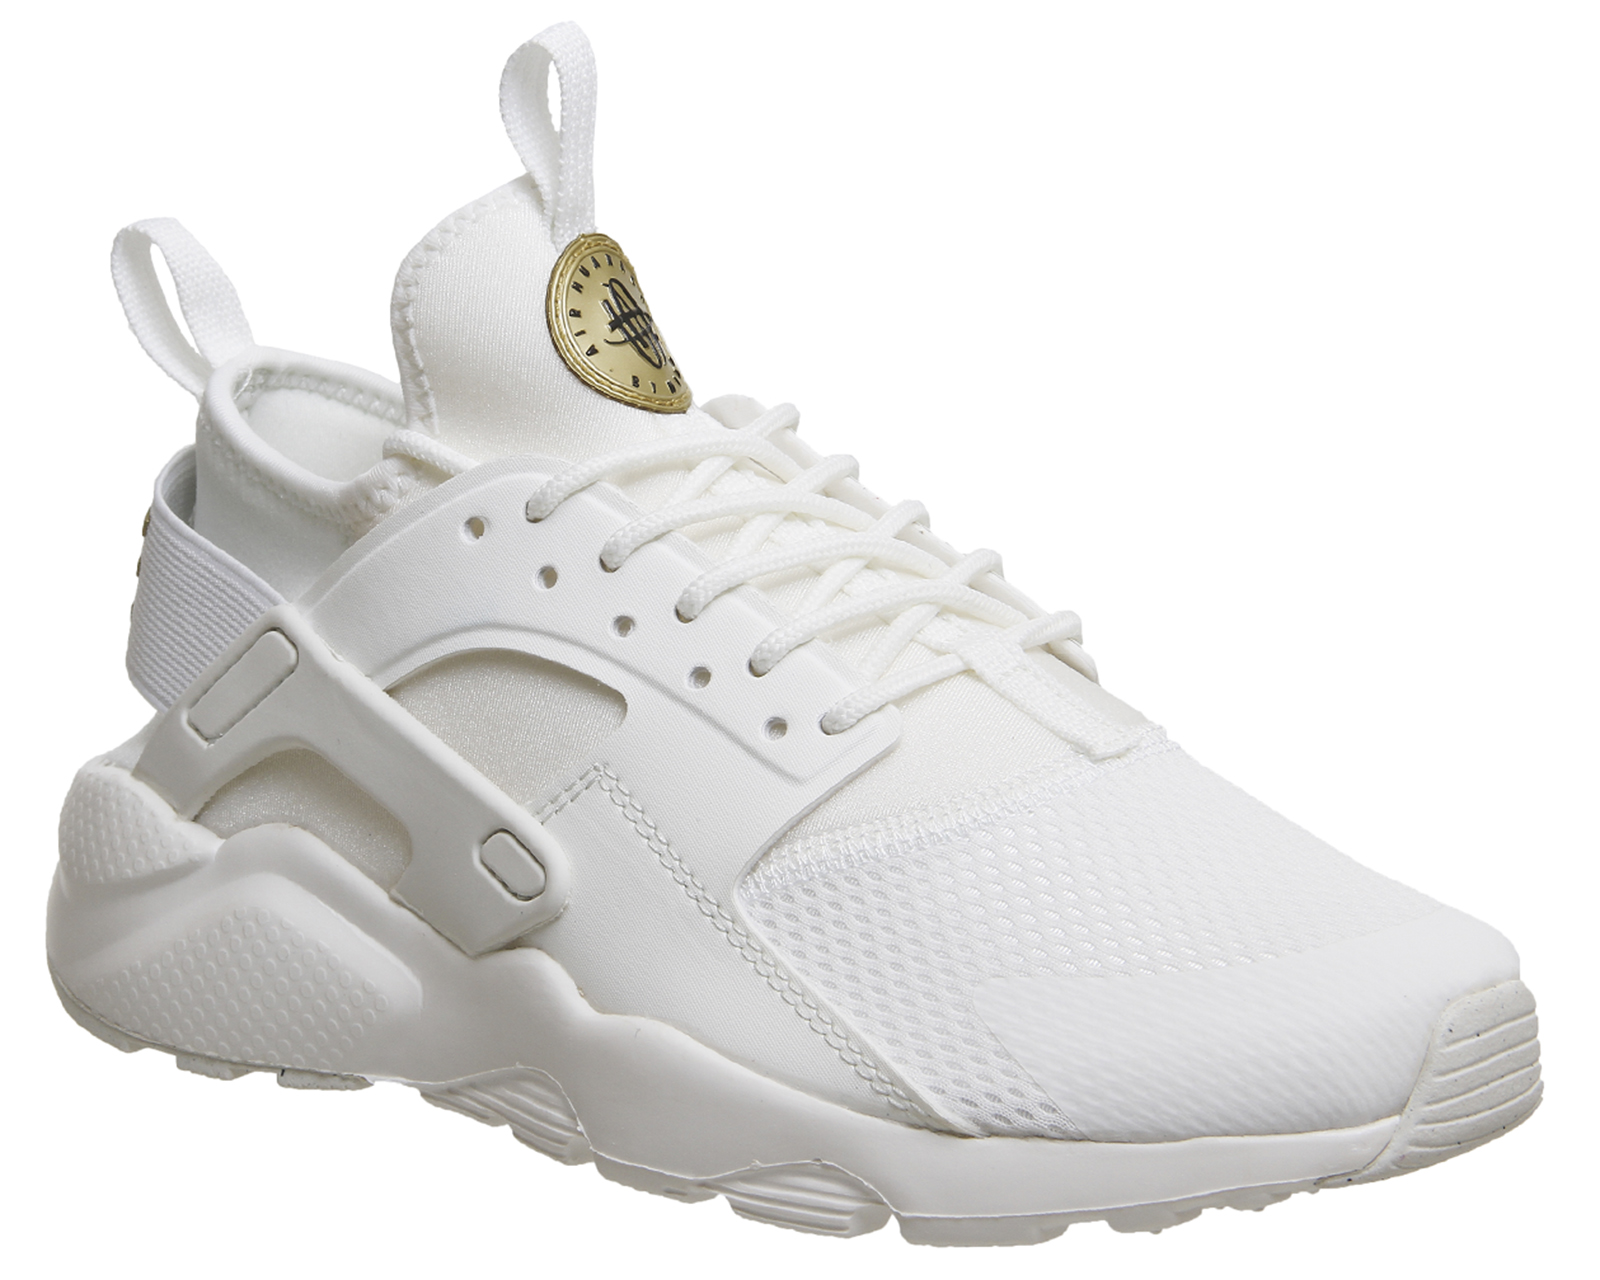 white and gold huaraches, Off 69%, www.davideast.net